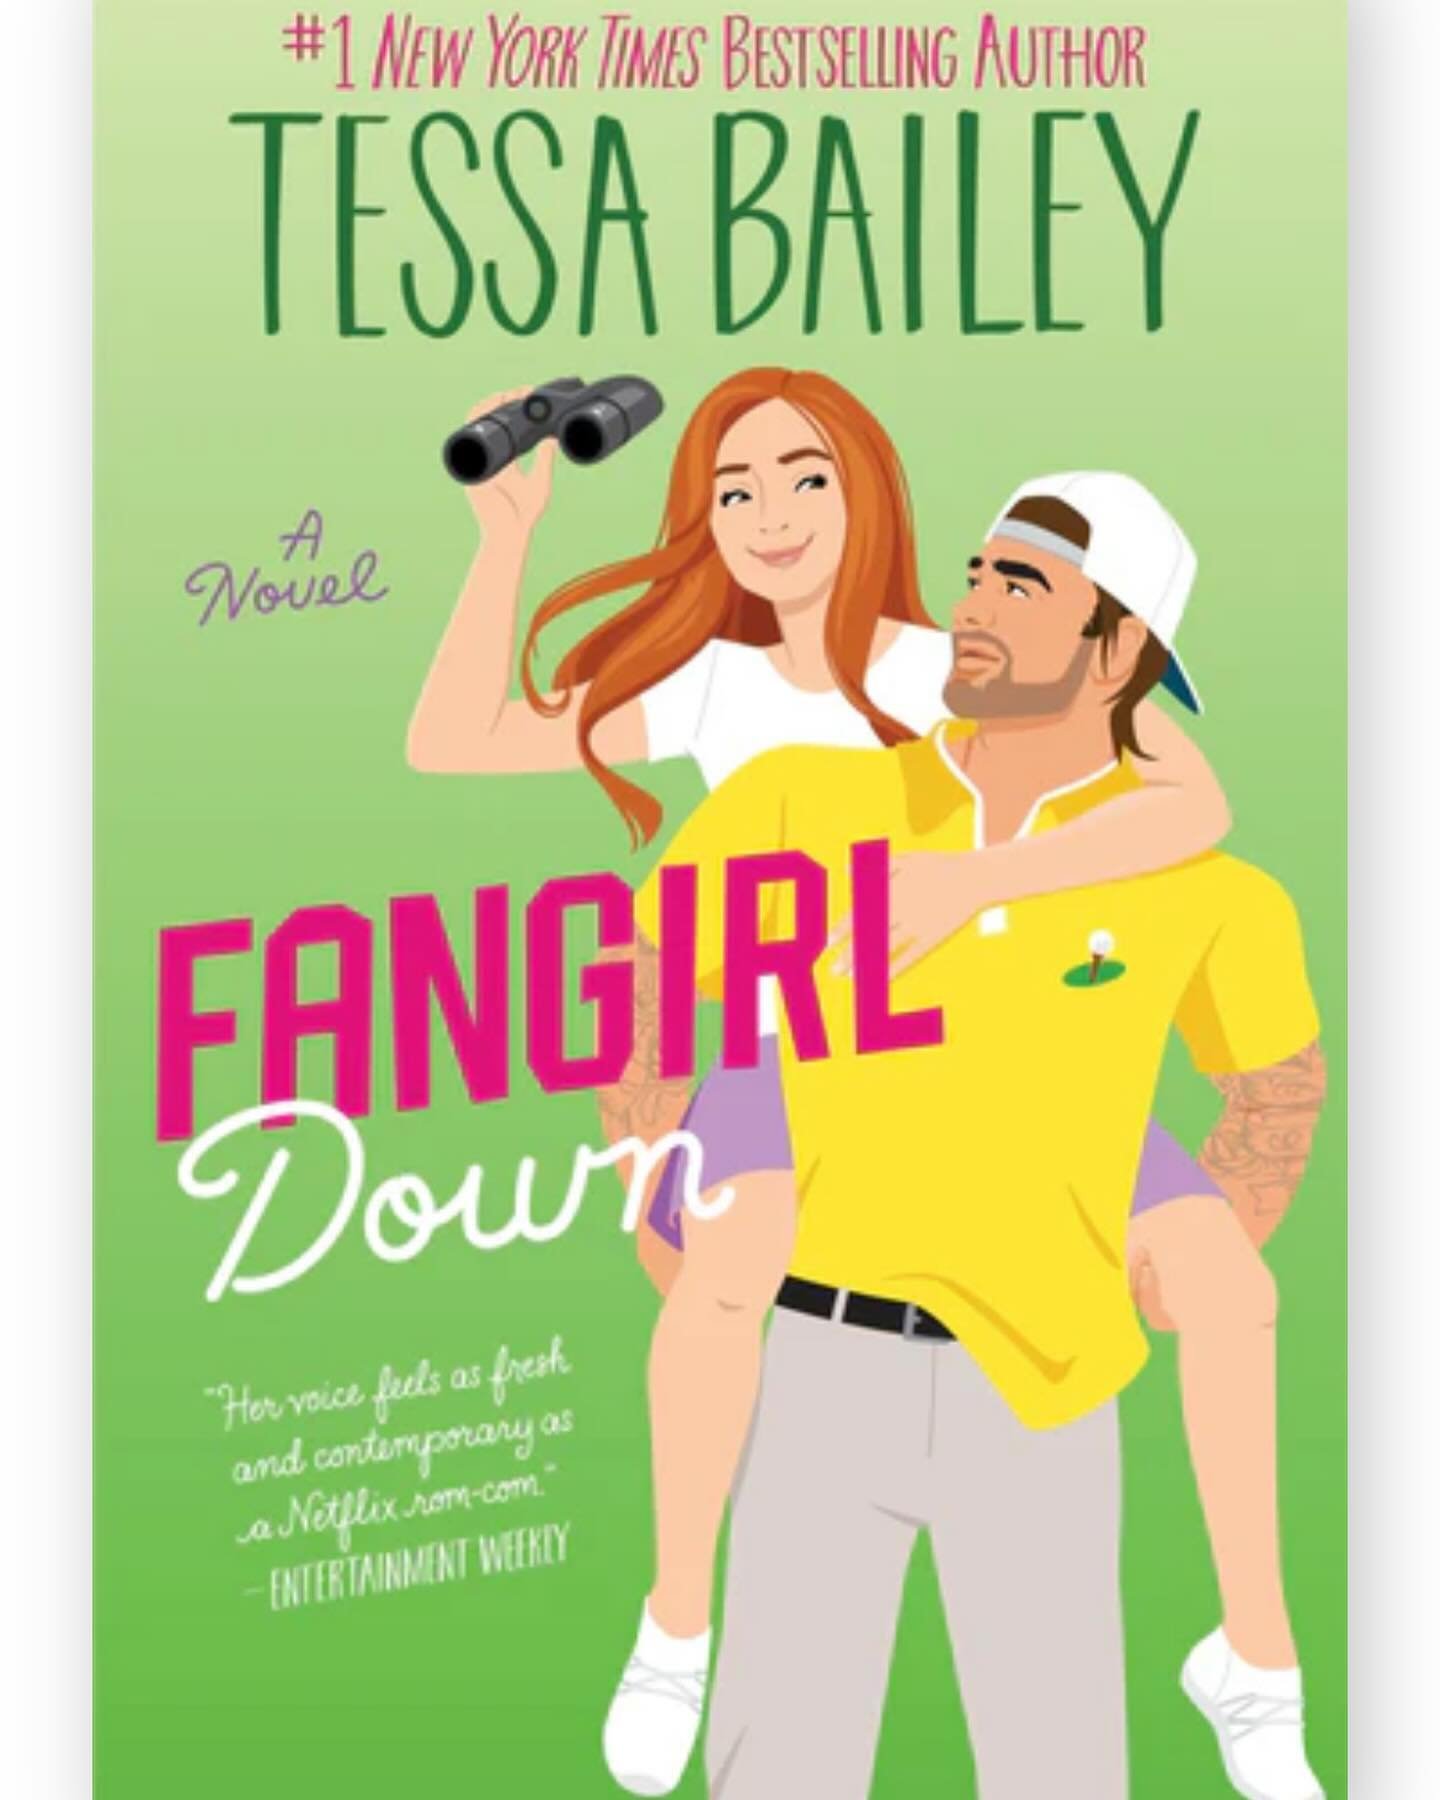 Full of Tessa Bailey&rsquo;s trademark humor and steam, Fangirl Down was such a fun ride and had great type 1 diabetes representation. 

Josephine is Wells&rsquo; number one fan, years after everyone else in his life has given up on him. But when she